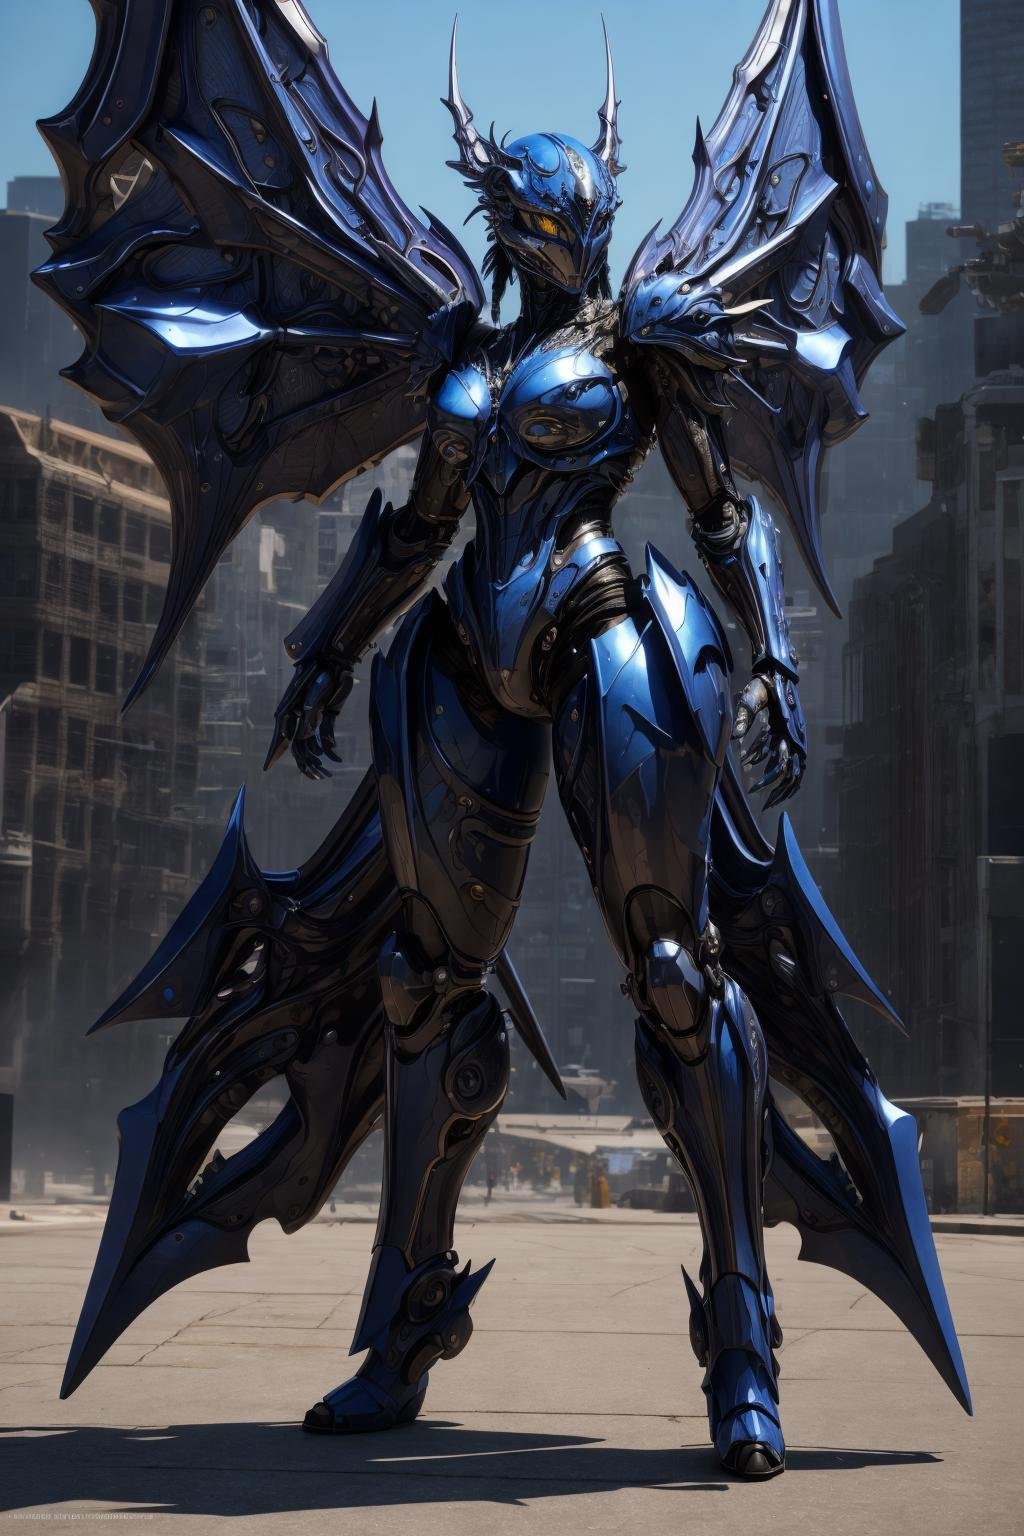 <lora:hades_armor_v3:0.7>masterpice, highly detailed photorealistic raw photography, best quality, volumetric lighting, volumetric shadows1girl in Cornflower Blue hades_armor, musculated body, alien eyes, helmet, monster form, claws, metal demon wings, armor reflexions, lying against the ground, hand on headsteampunk city background with multicolor flowers